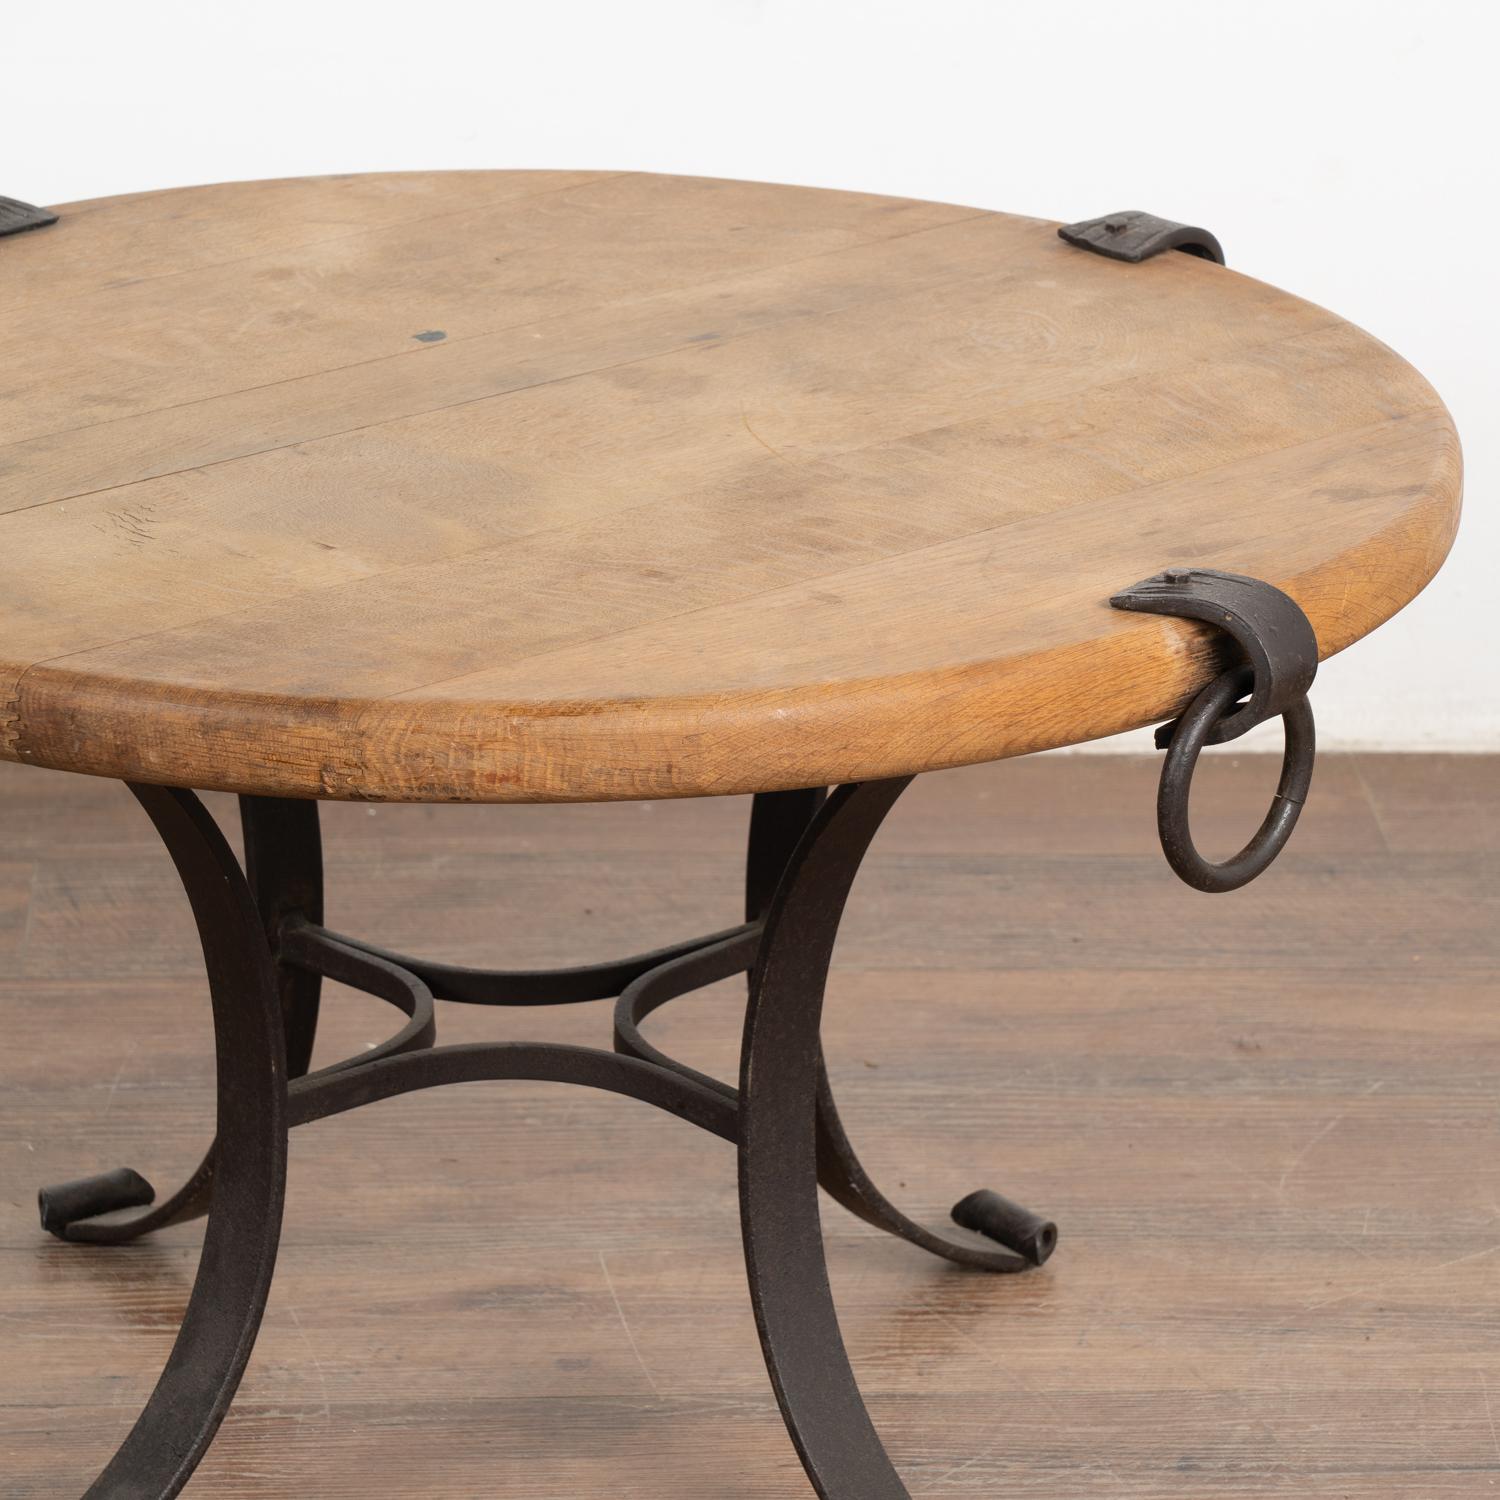 Small Round Coffee Table on Rustic Iron Base, France circa 1960-70 For Sale 1